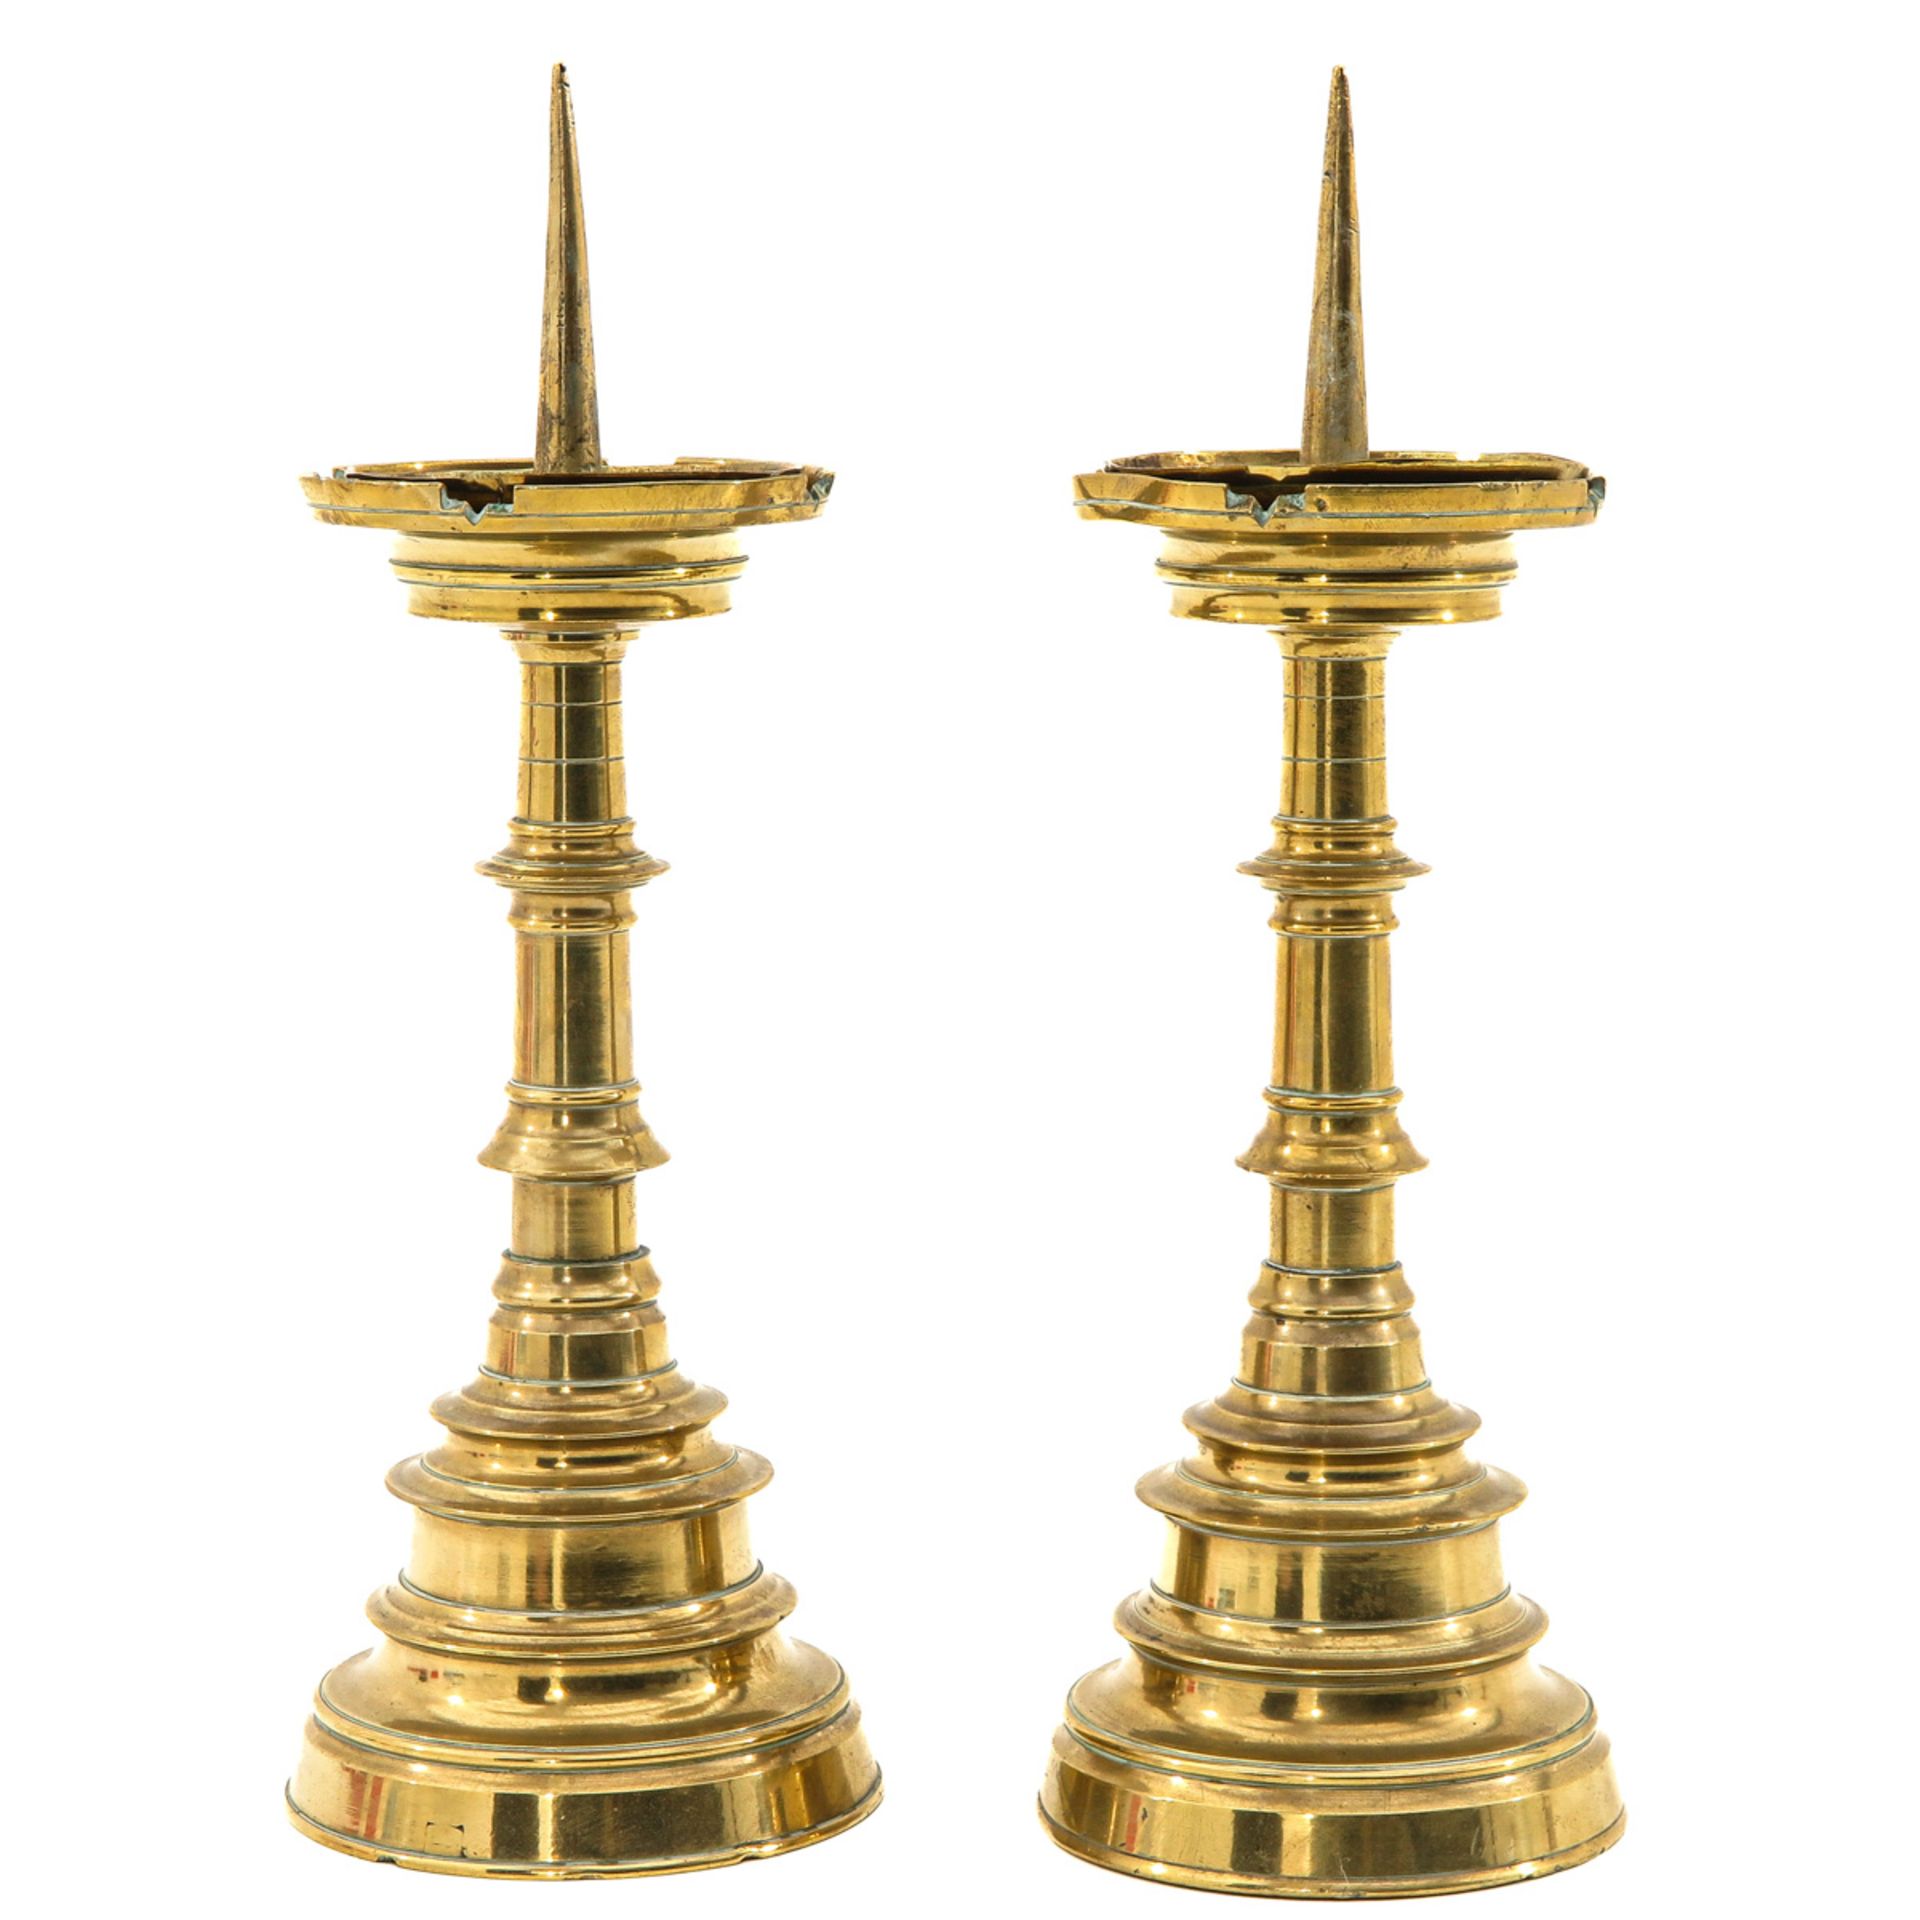 A Pair of Copper Candlesticks - Image 3 of 10